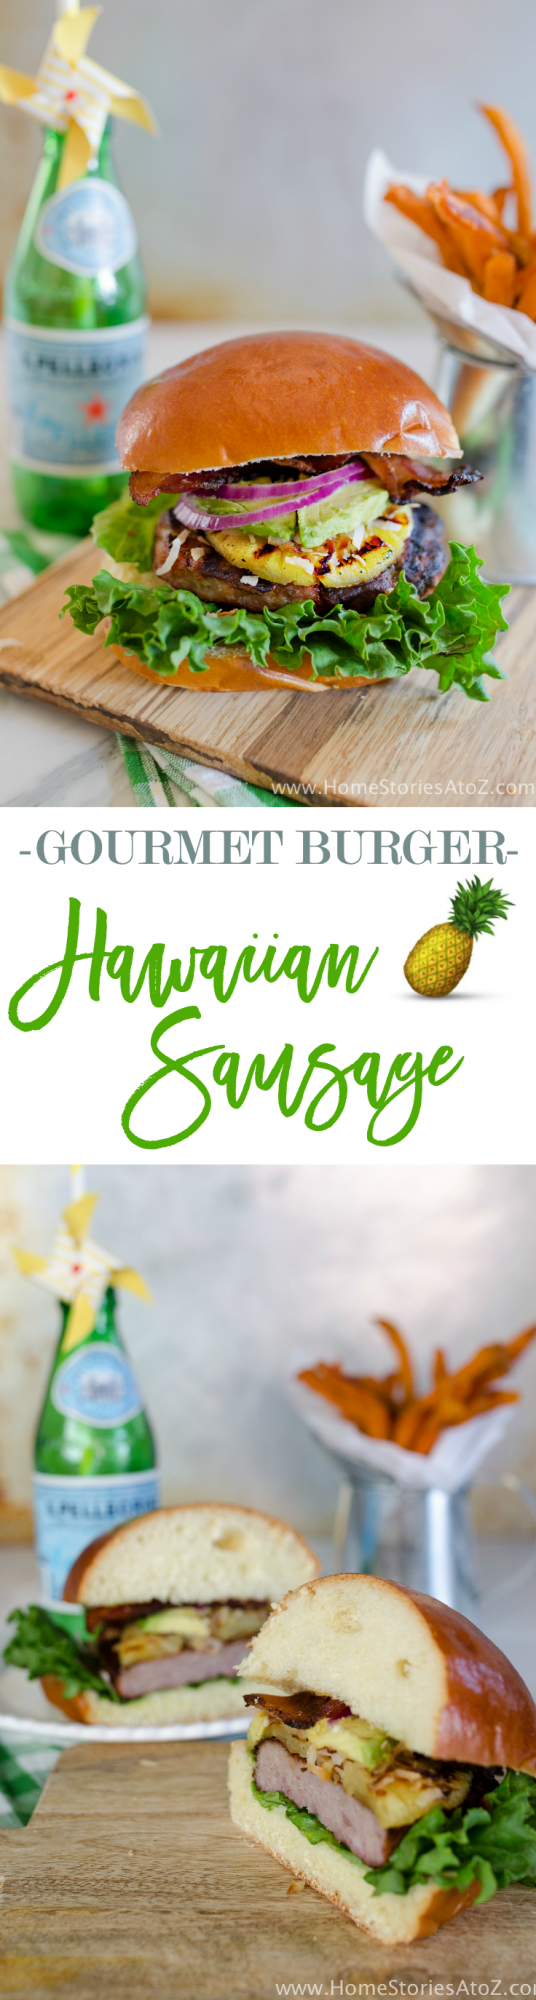 Fantastic gourmet burger recipe! Hawaiian Sausage Burger made with sausage, grilled pineapple, toasted coconut, avocado, and jalapeno bacon